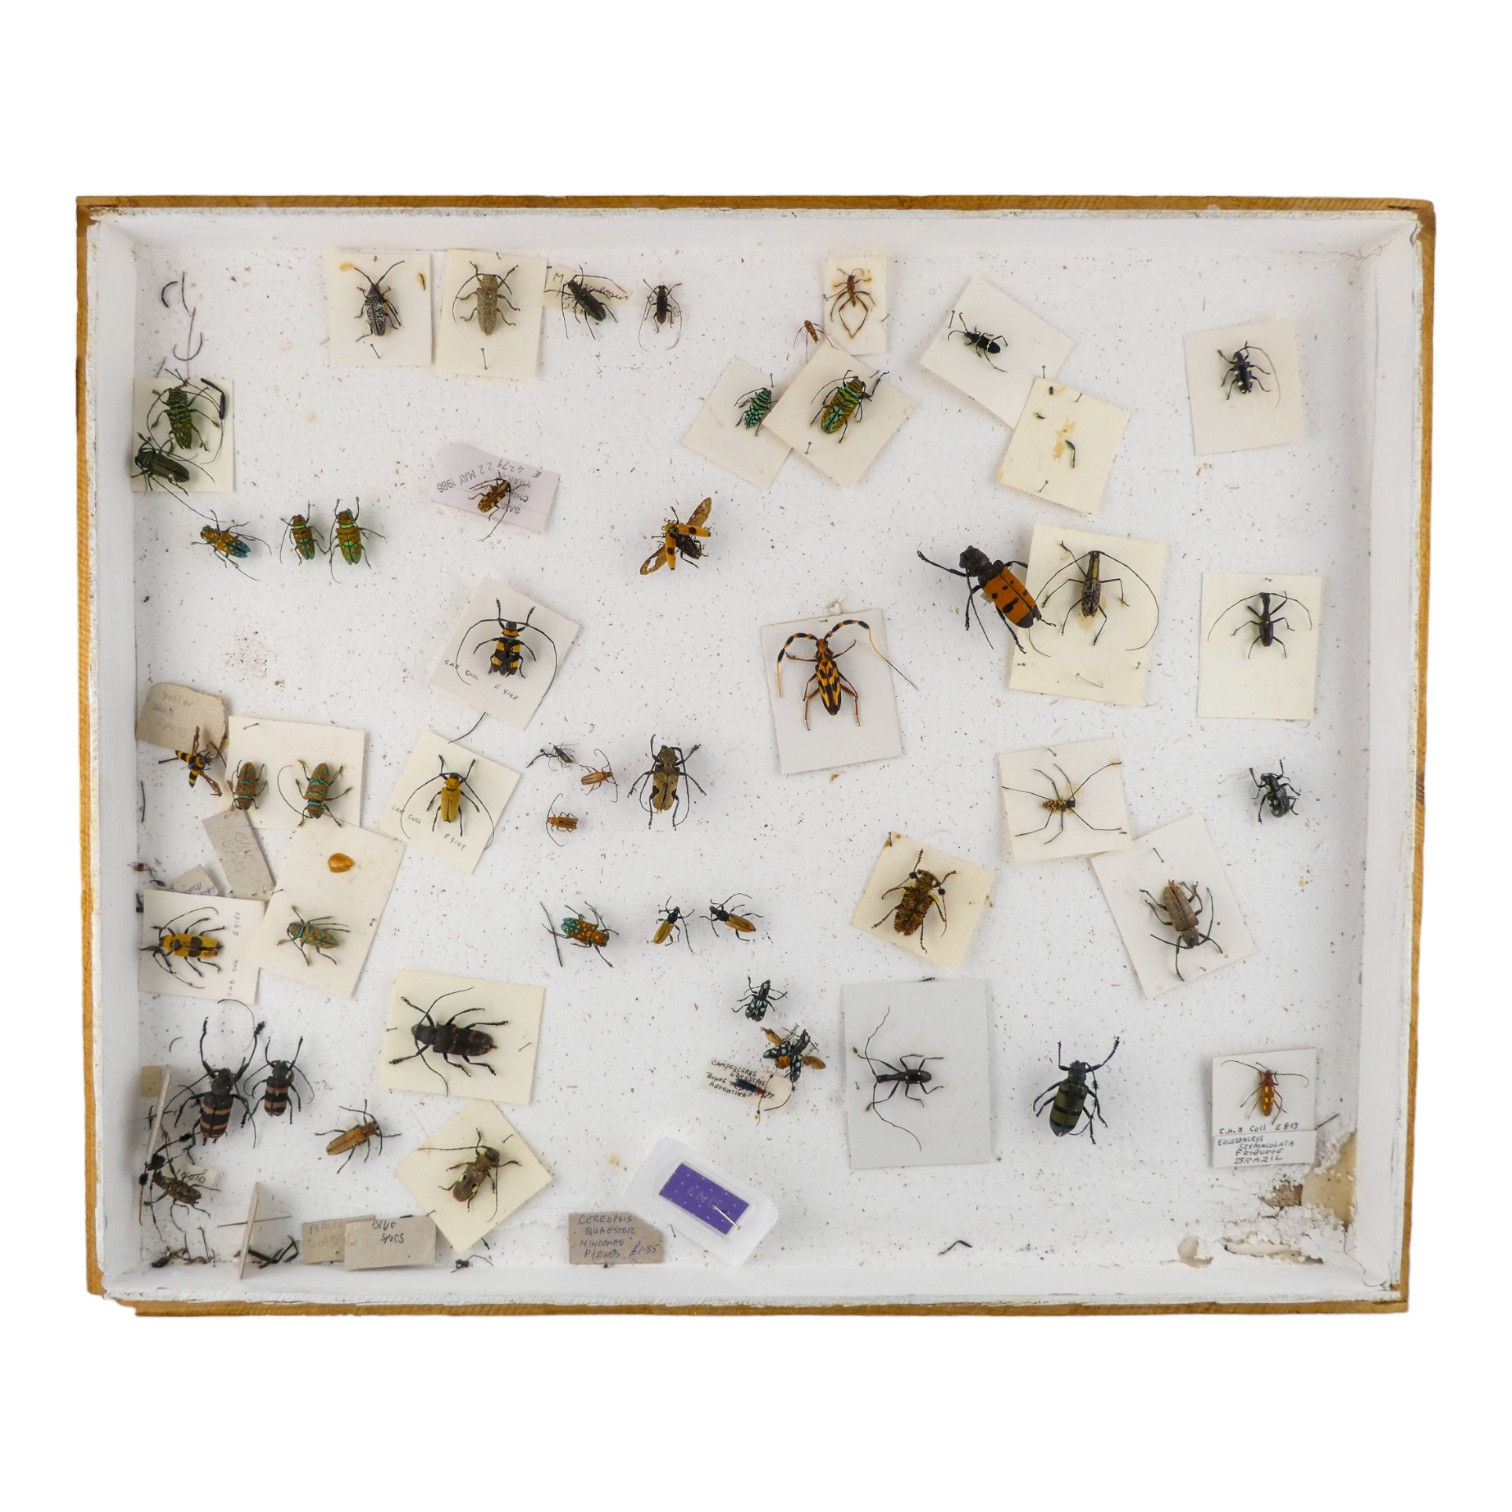 A case of insects and beetles - randomly arranged